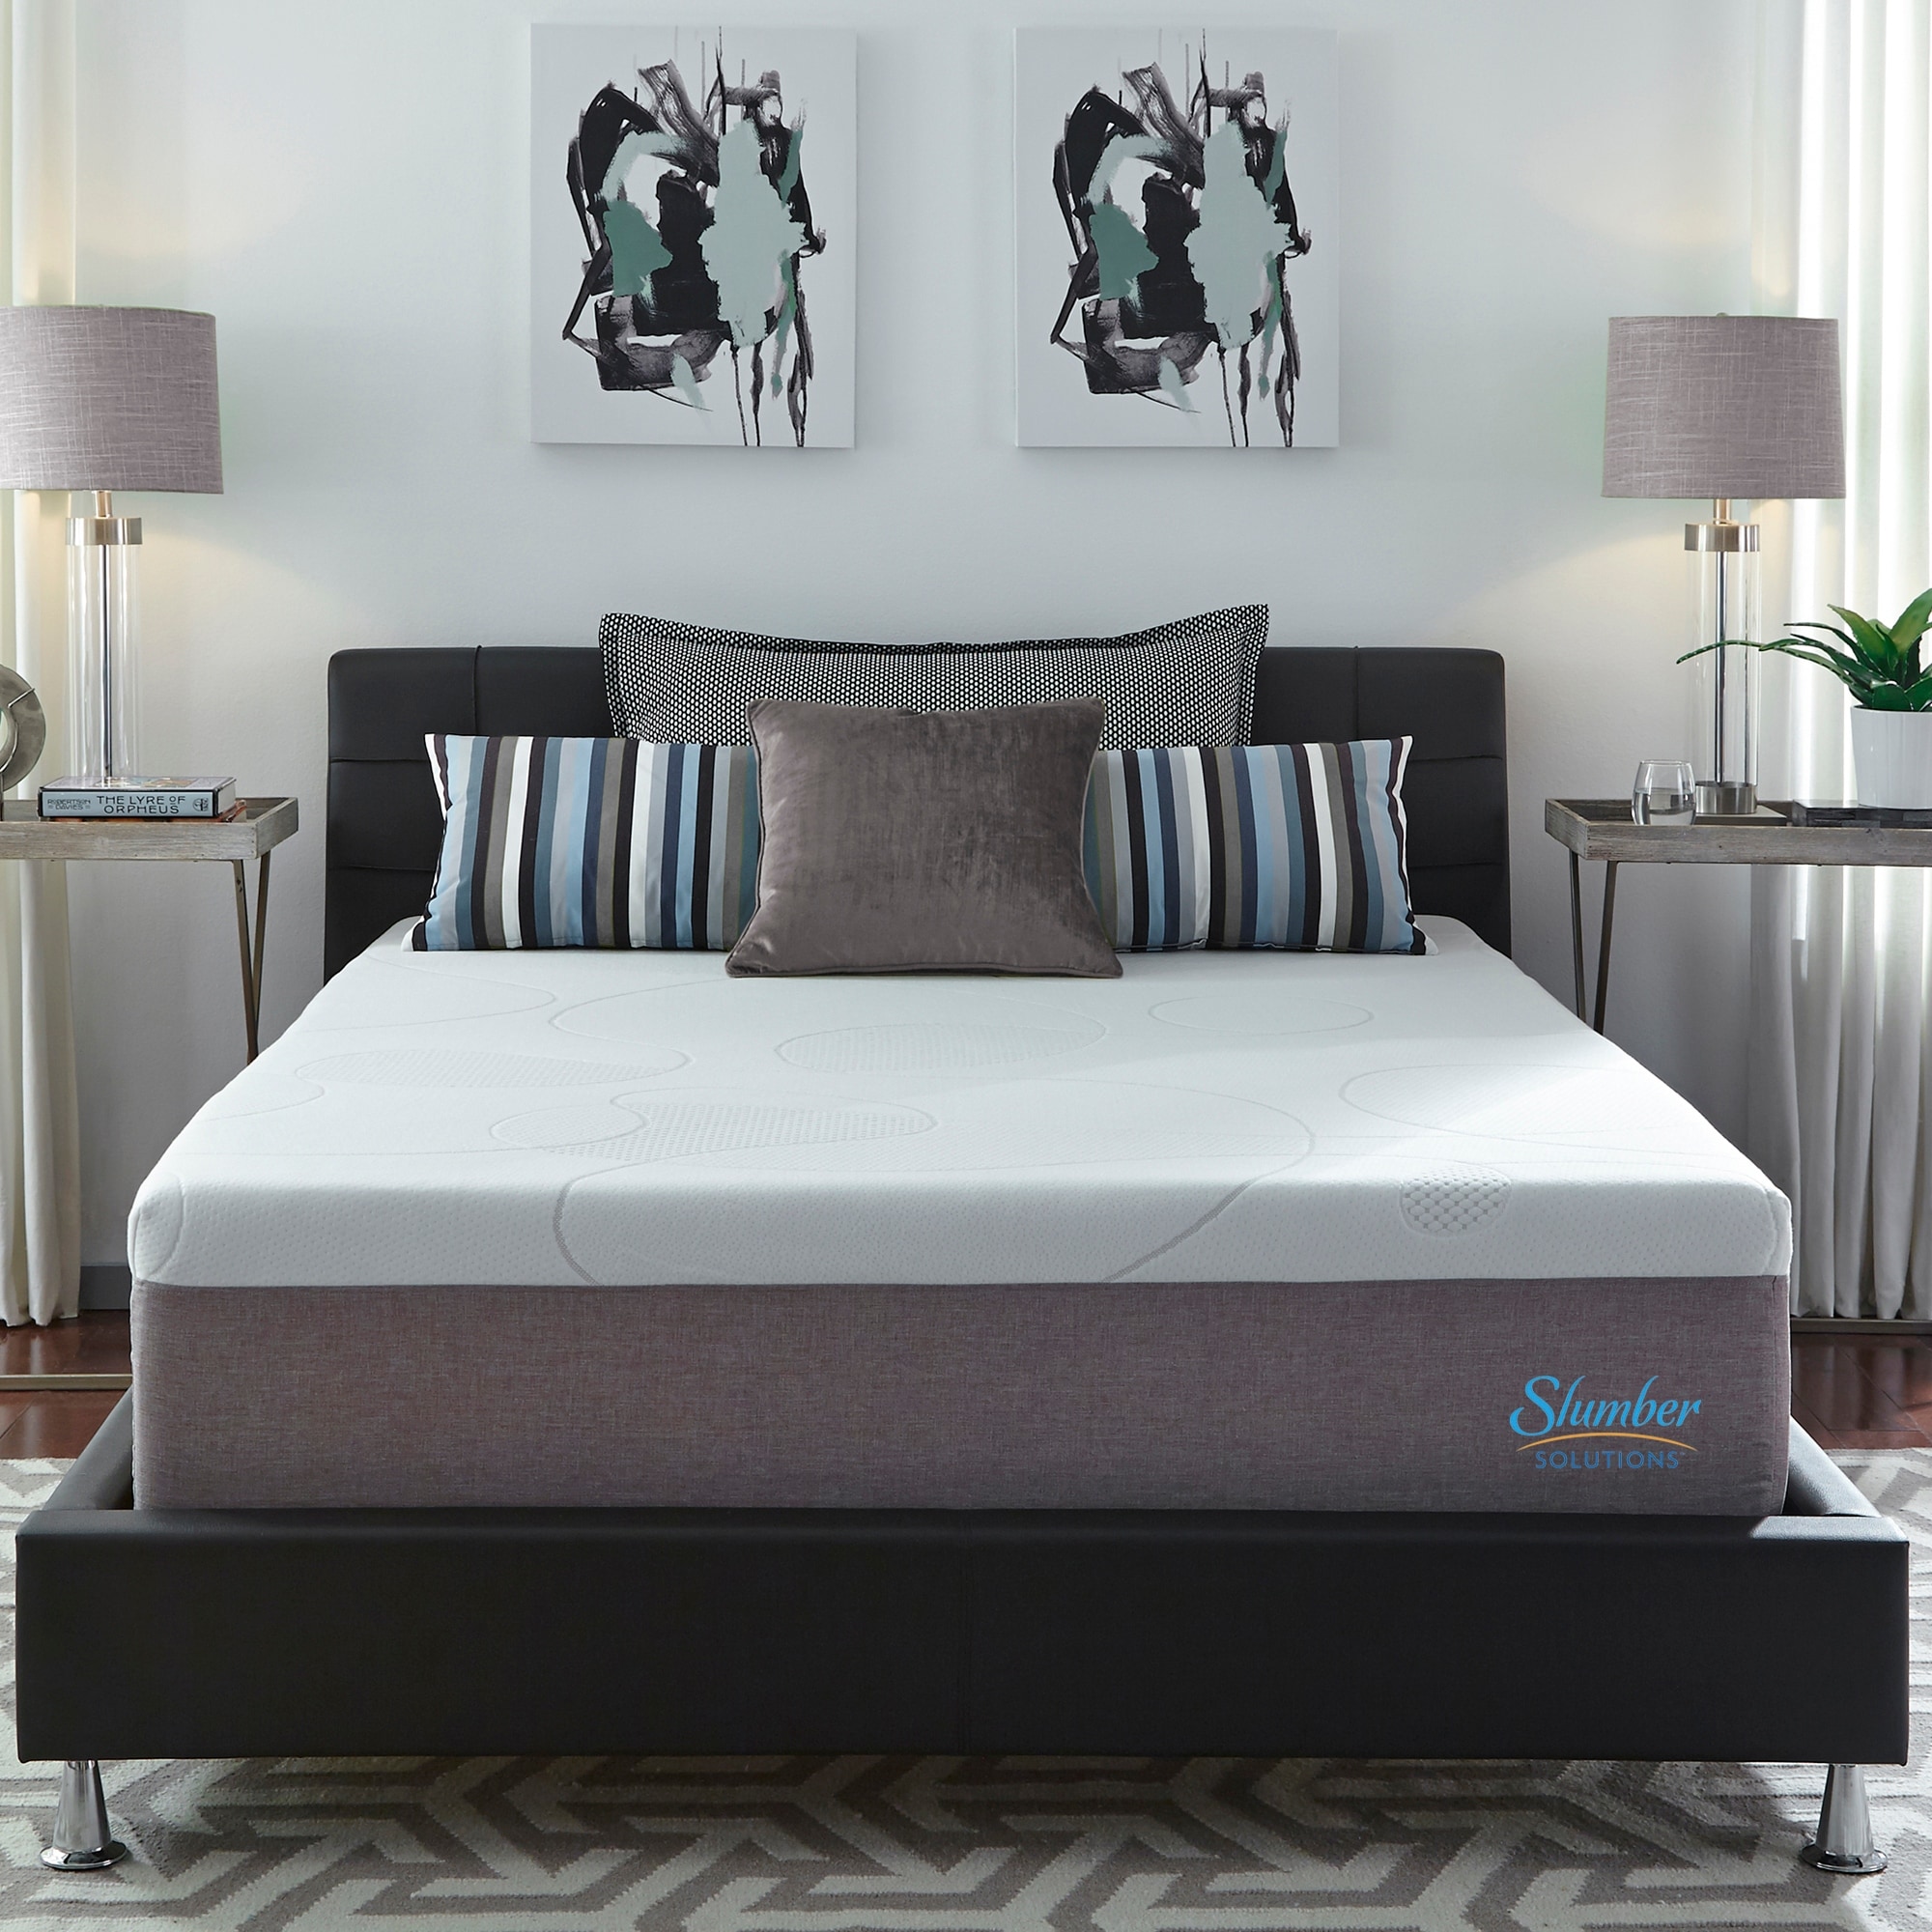 https://ak1.ostkcdn.com/images/products/is/images/direct/1f96225aefc39dc6bad6a65c4a1773c4c2d52025/Slumber-Solutions-14-inch-Gel-Memory-Foam-Choose-Your-Comfort-Mattress.jpg